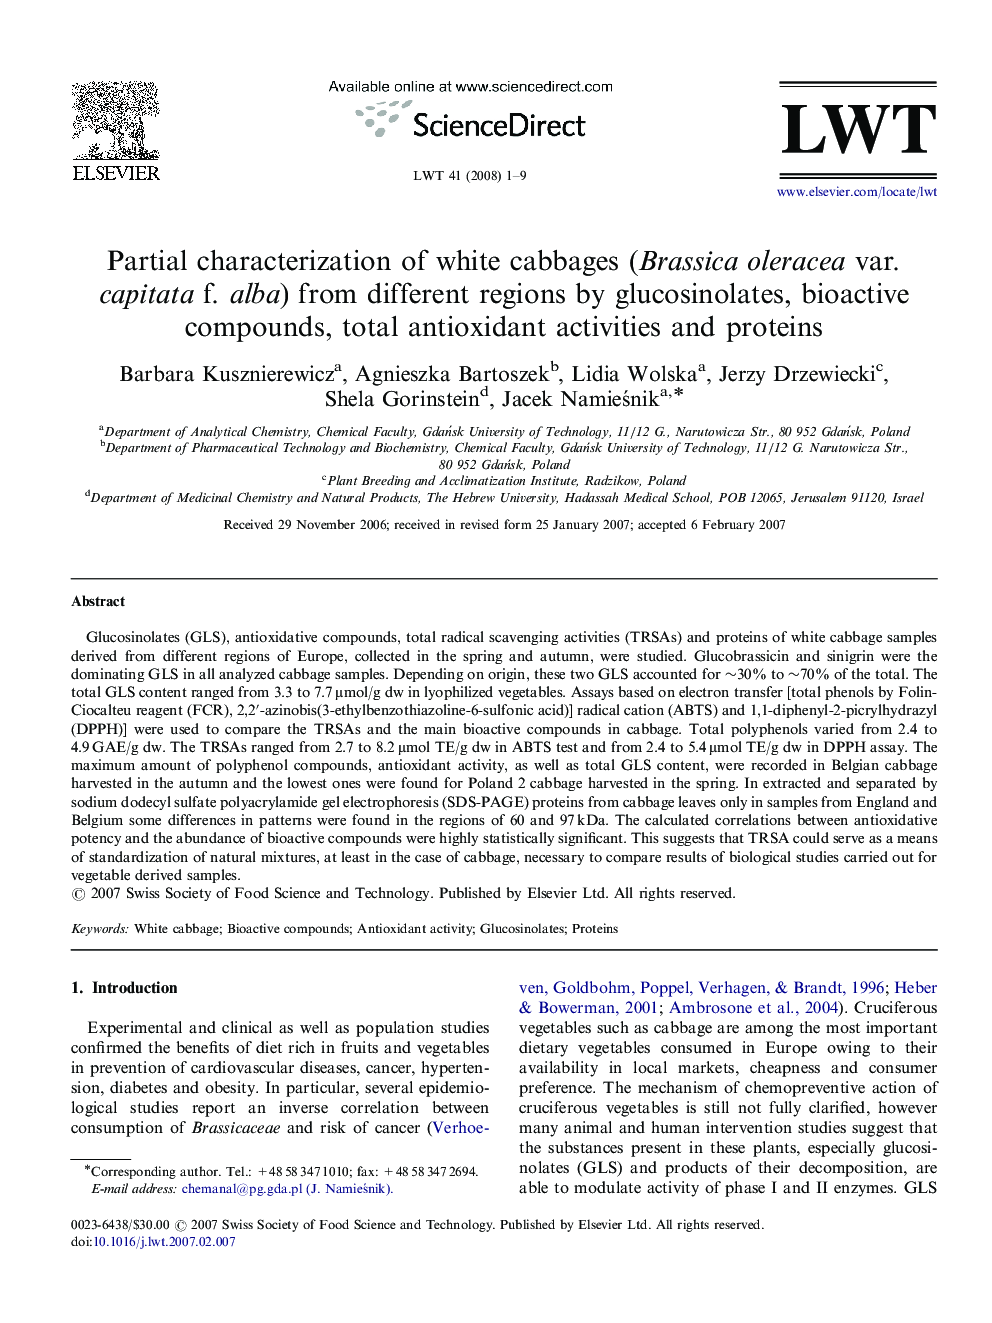 Partial characterization of white cabbages (Brassica oleracea var. capitata f. alba) from different regions by glucosinolates, bioactive compounds, total antioxidant activities and proteins